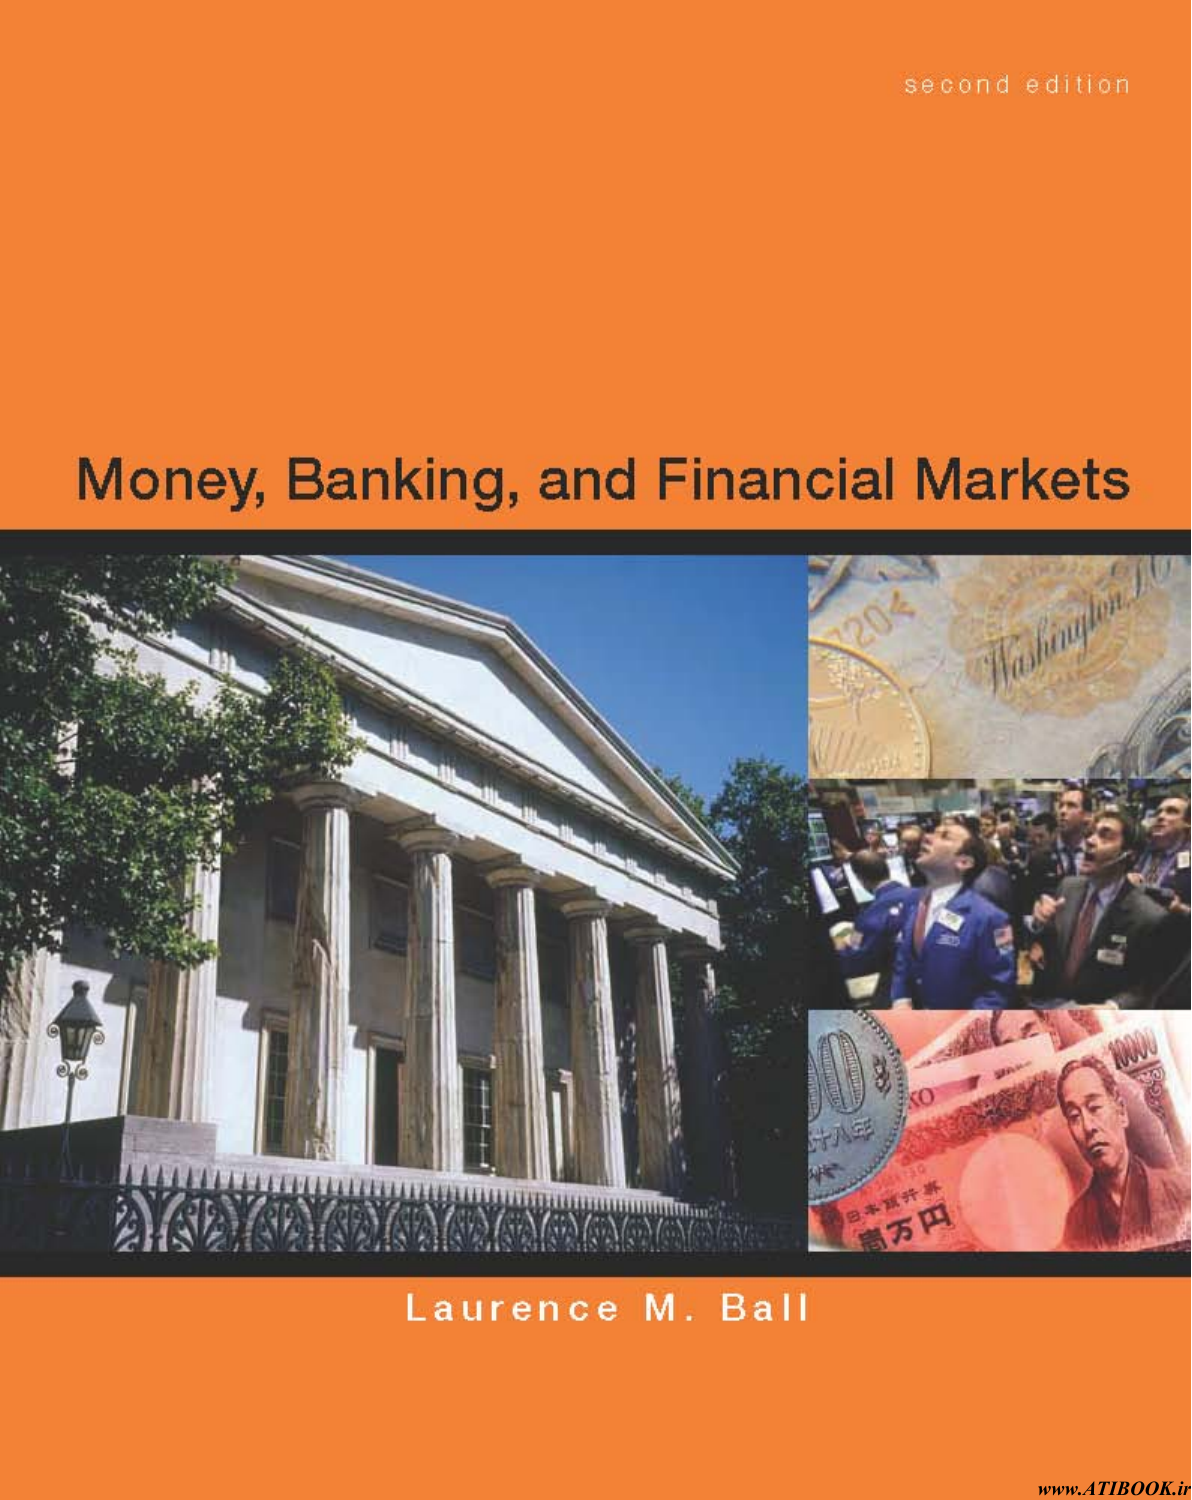 Banking monetary. Money Banking and Financial Markets книга. Money and Banking. Money Banking and Financial Markets. Money, Banking, and yhe Financial System book.